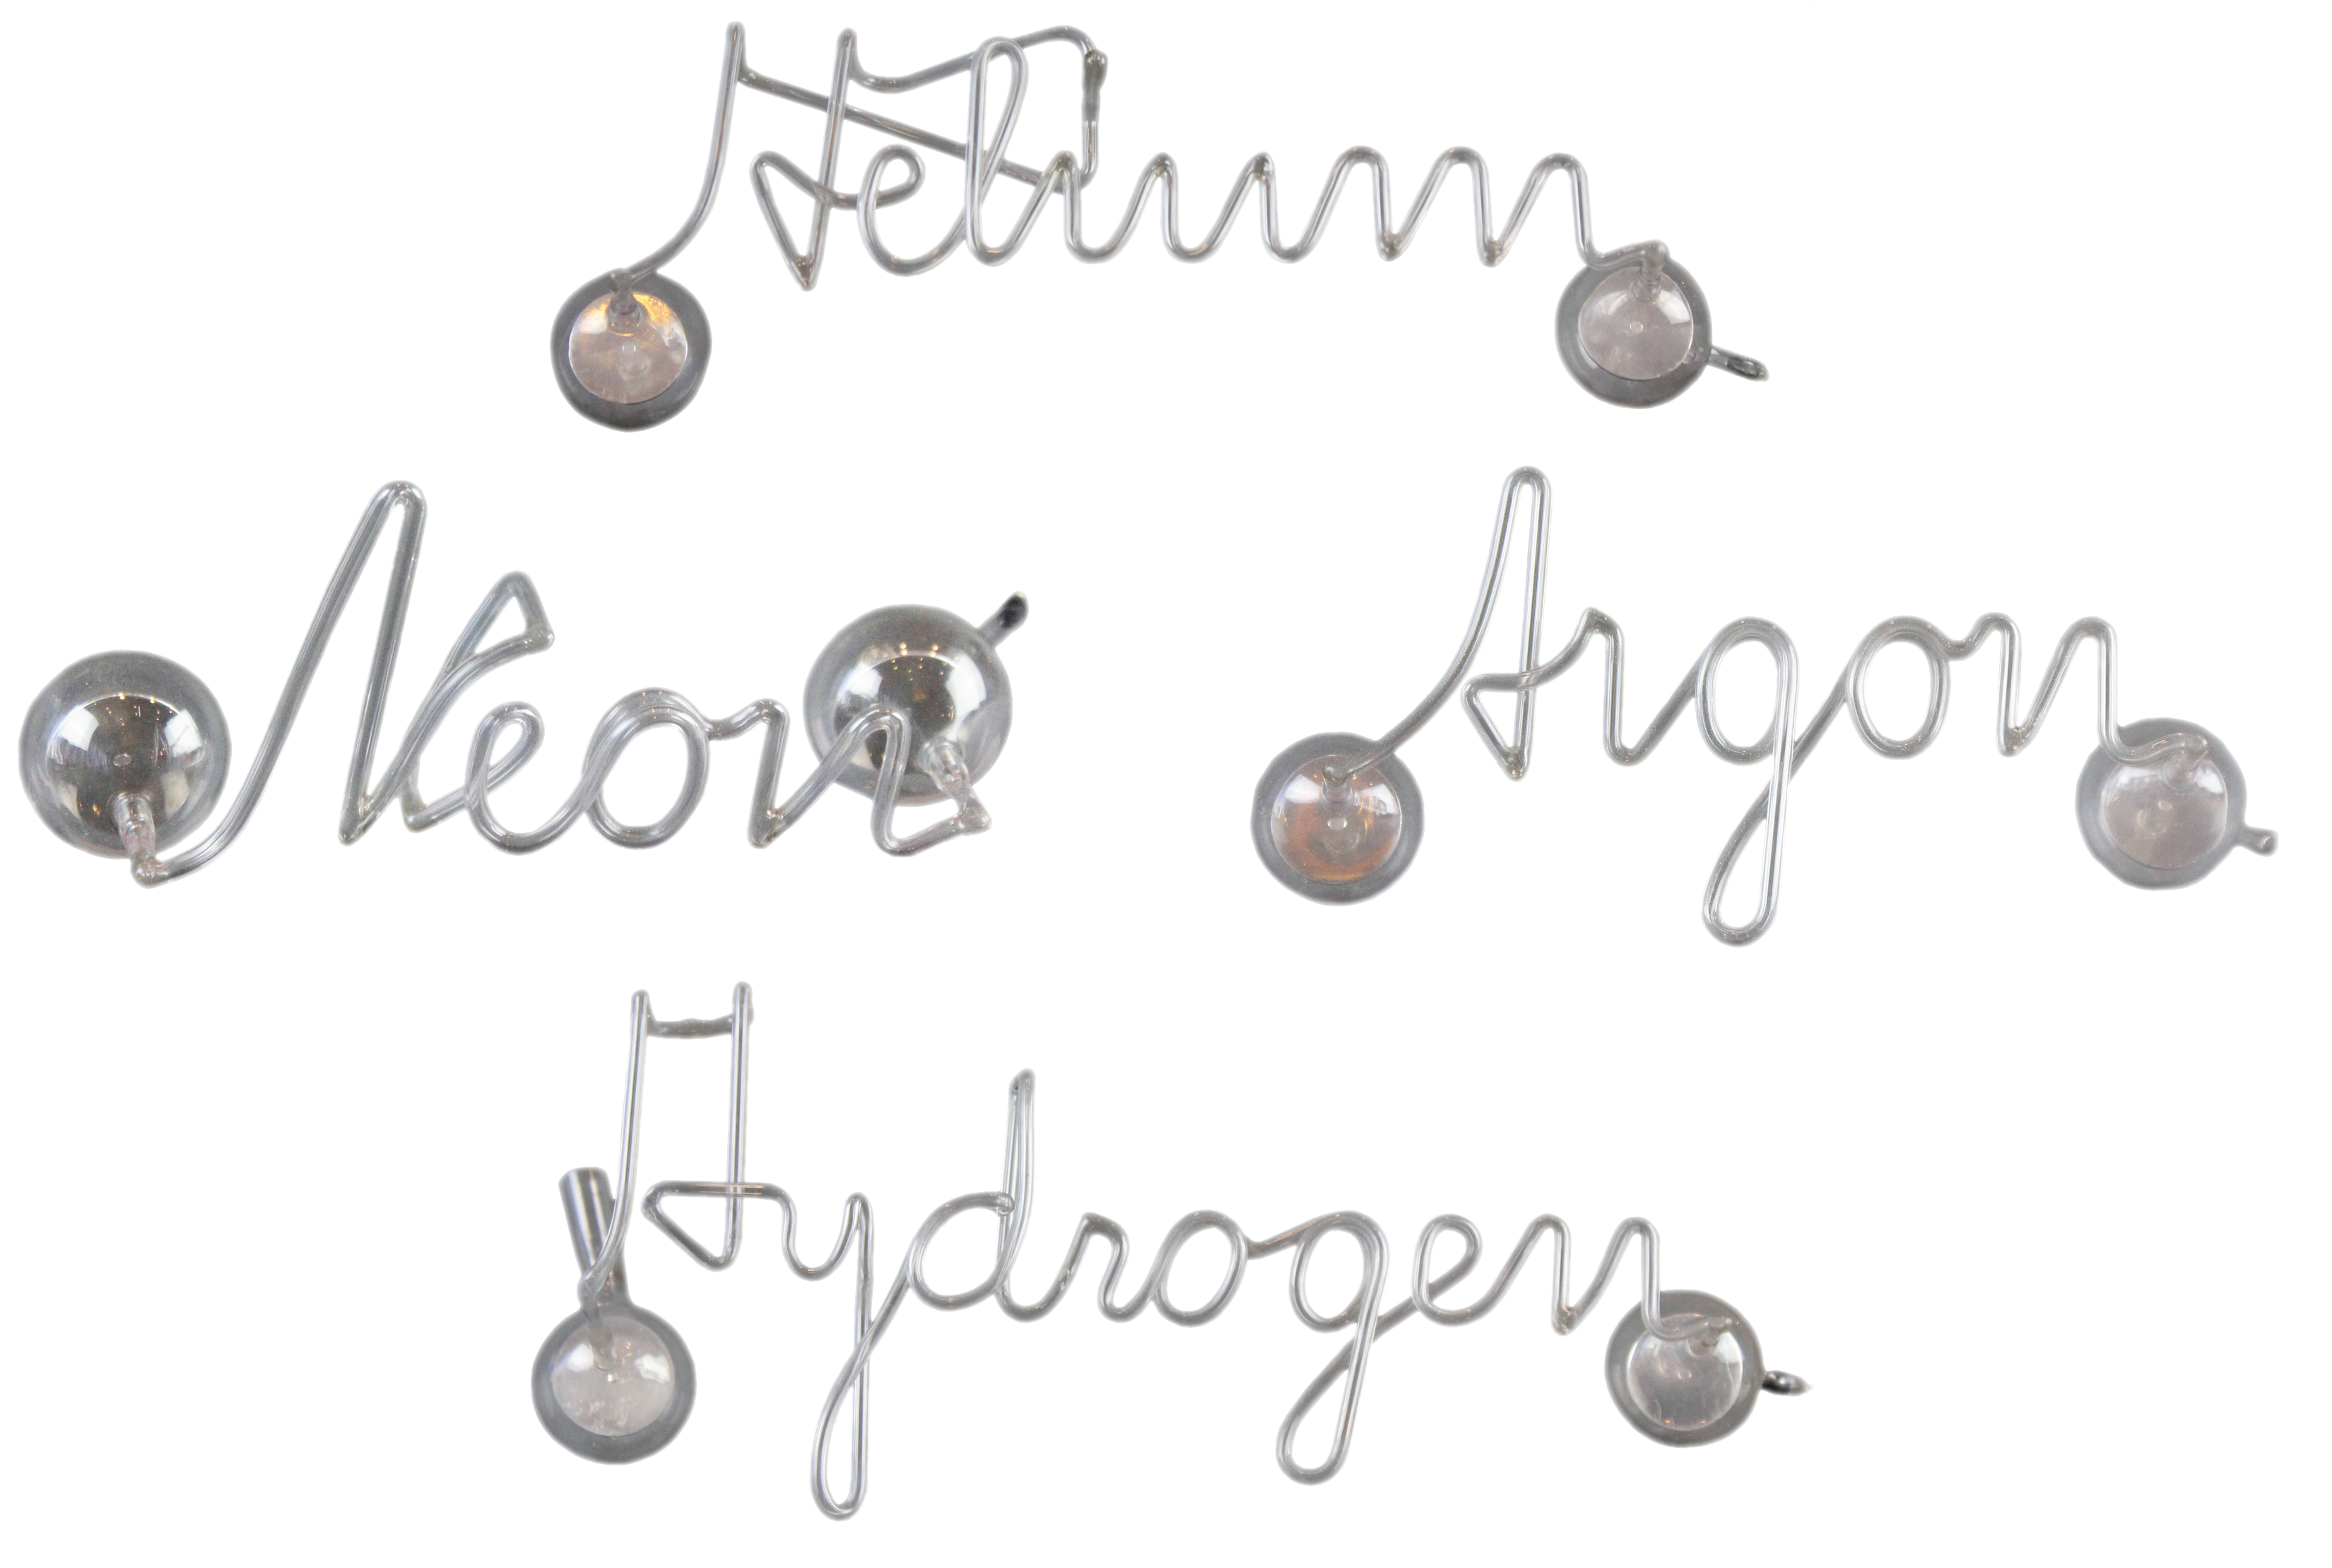 Luminous Script Lights fabricated into the name of the gas they contain, including Helium, Neon, Argon, and Hydrogen.